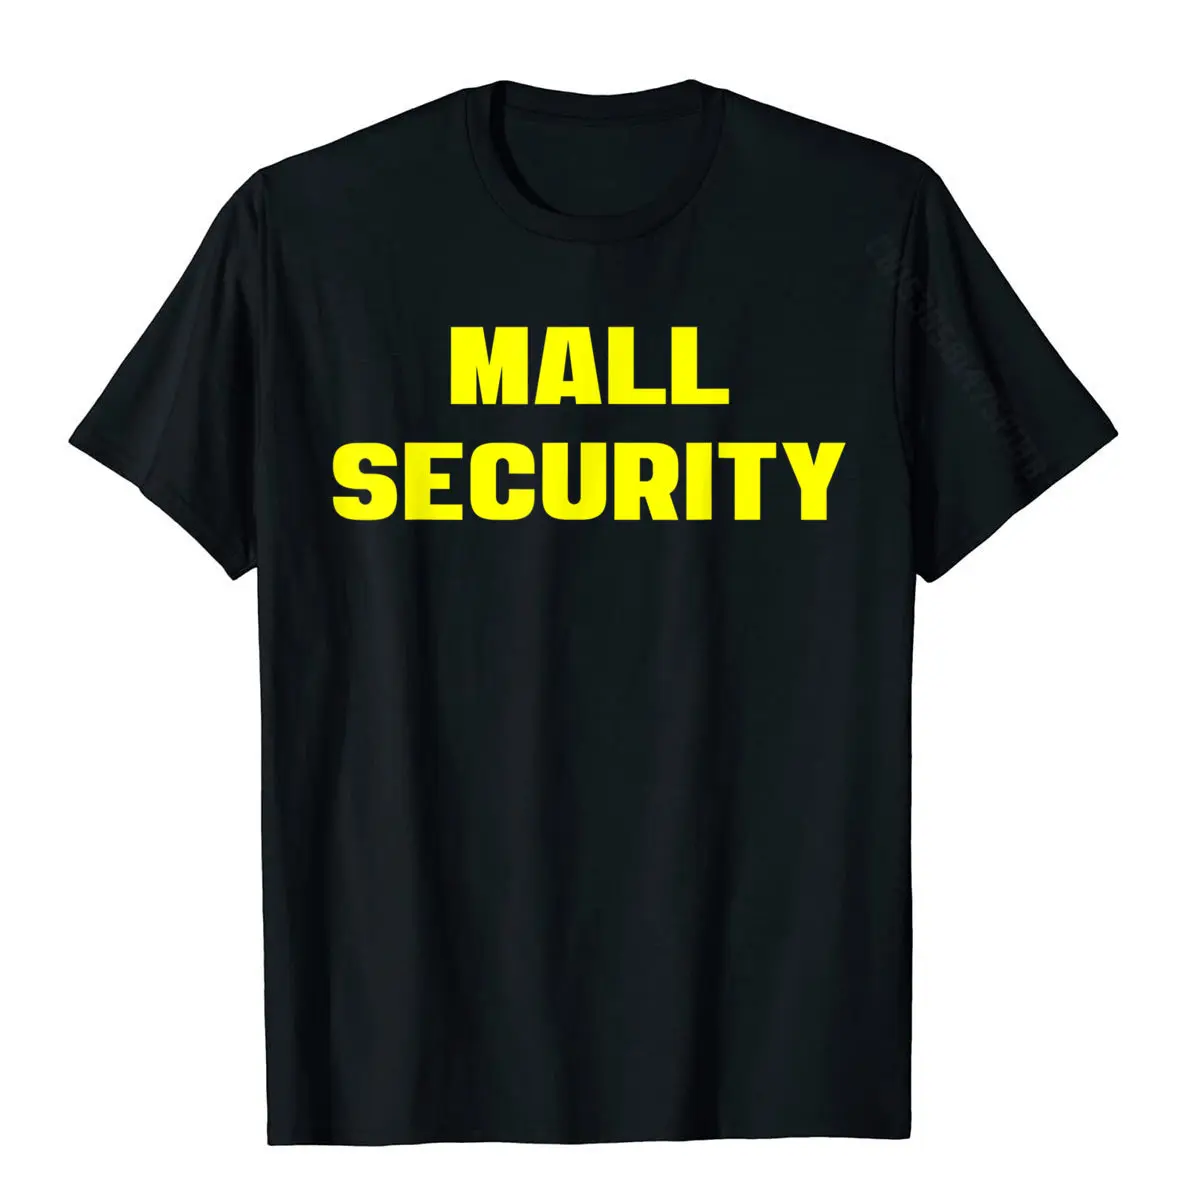 MALL SECURITY Staff Mall Cop Vintage Ironic T-Shirt Tops & Tees Family Design Cotton Men Top T-Shirts Unique